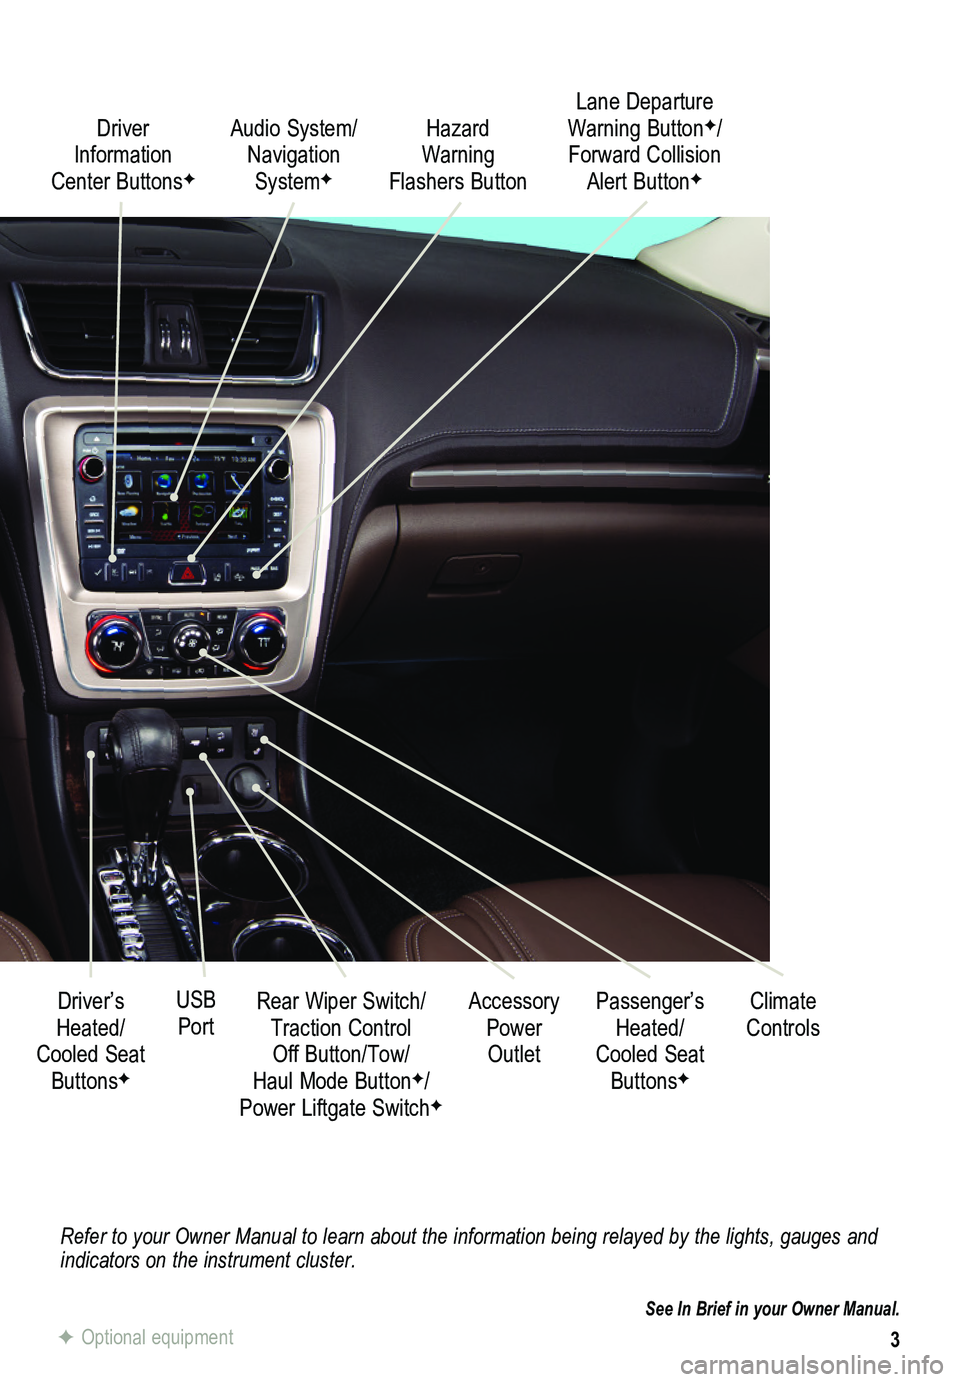 GMC ACADIA 2015  Get To Know Guide 3
Refer to your Owner Manual to learn about the information being relayed \
by the lights, gauges and indicators on the instrument cluster.
See In Brief in your Owner Manual.
Driver Information Center